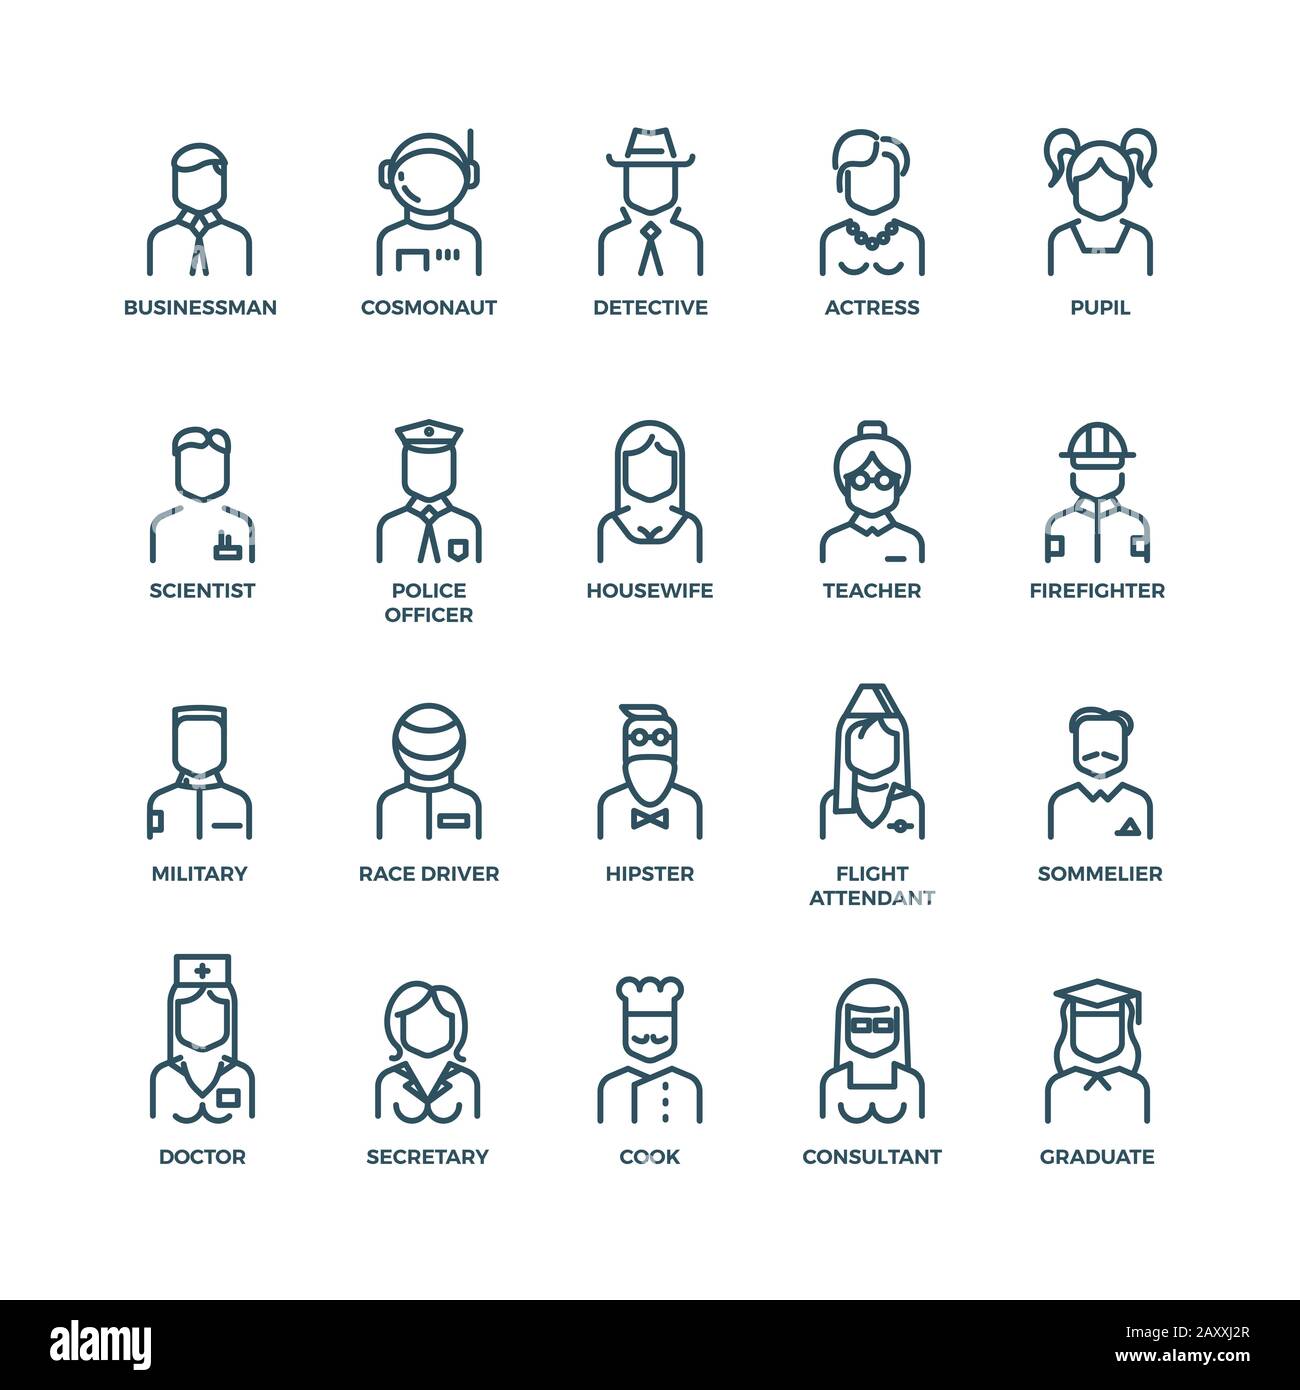 People avatars, characters staff, professions. Career people, manager profession, people profession, icon character professions. Vector illustration l Stock Vector